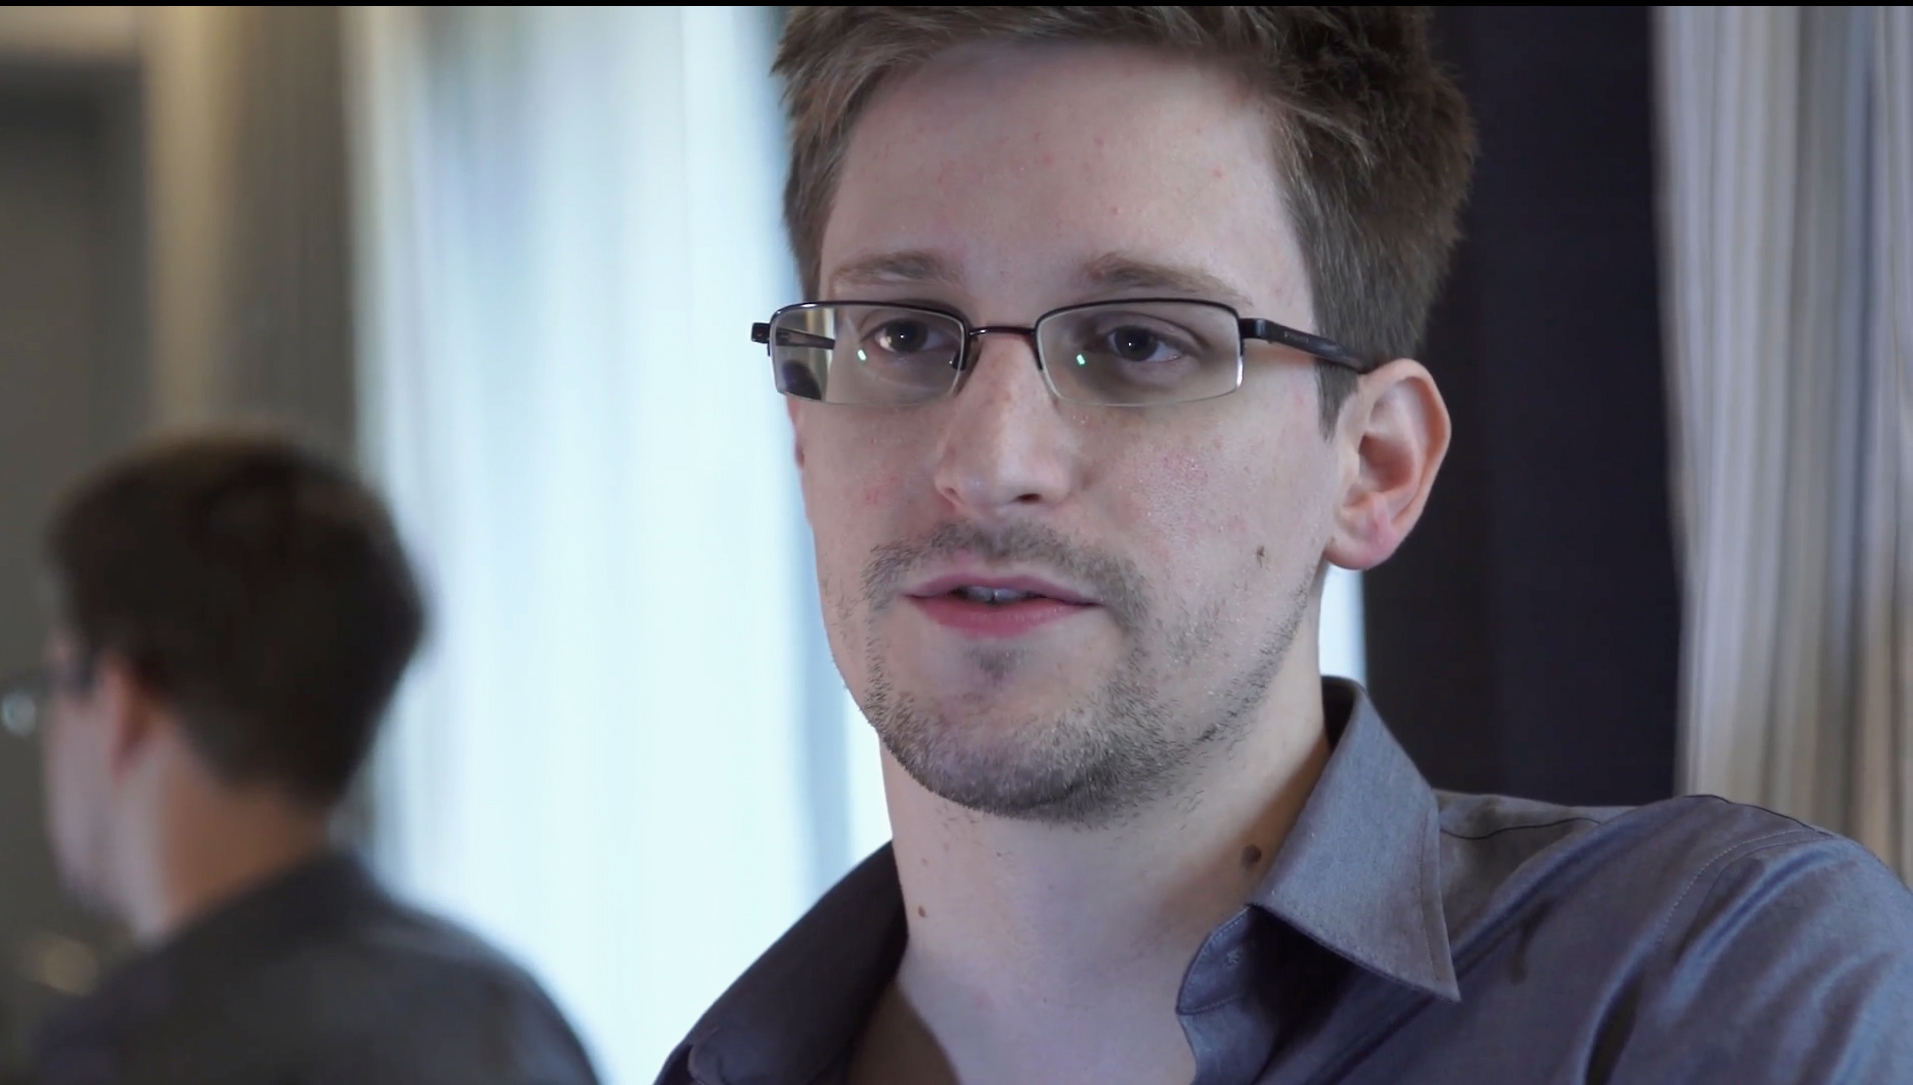 This file photo provided by The Guardian Newspaper in London shows National Security Agency leaker Edward Snowden in Hong Kong. The US National Security Agency is making strides toward building a “quantum computer” that could break nearly any kind of encryption, The Washington Post reported on Thursday, citing leaked documents from fugitive ex-NSA contractor Edward Snowden.  AP PHOTO/THE GUARDIAN, GLENN GREENWALD AND LAURA POITRAS 